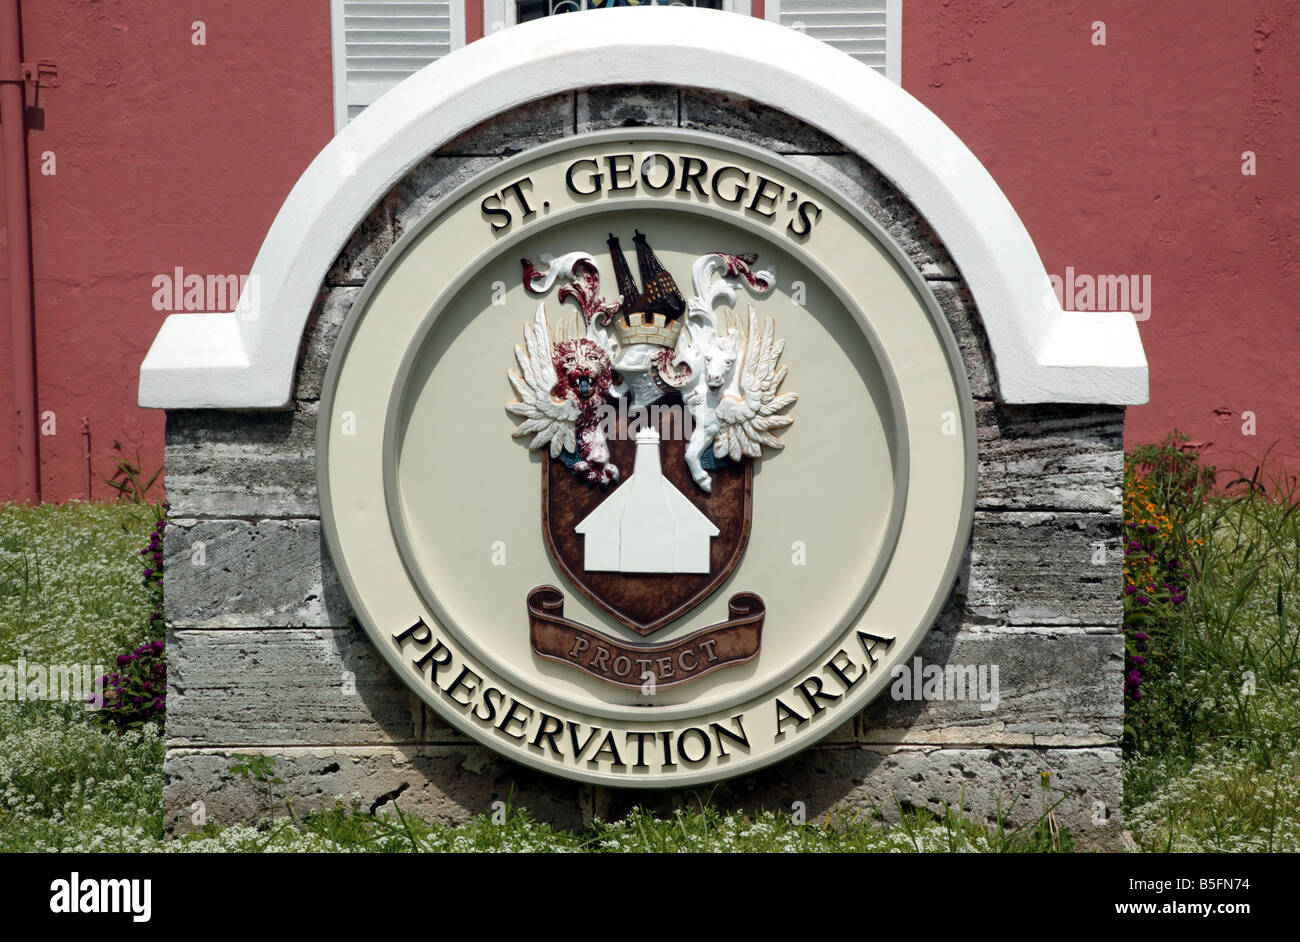 Hand made sign  advertising the historic preservation area in the historic old town of St George, Bermuda Stock Photo